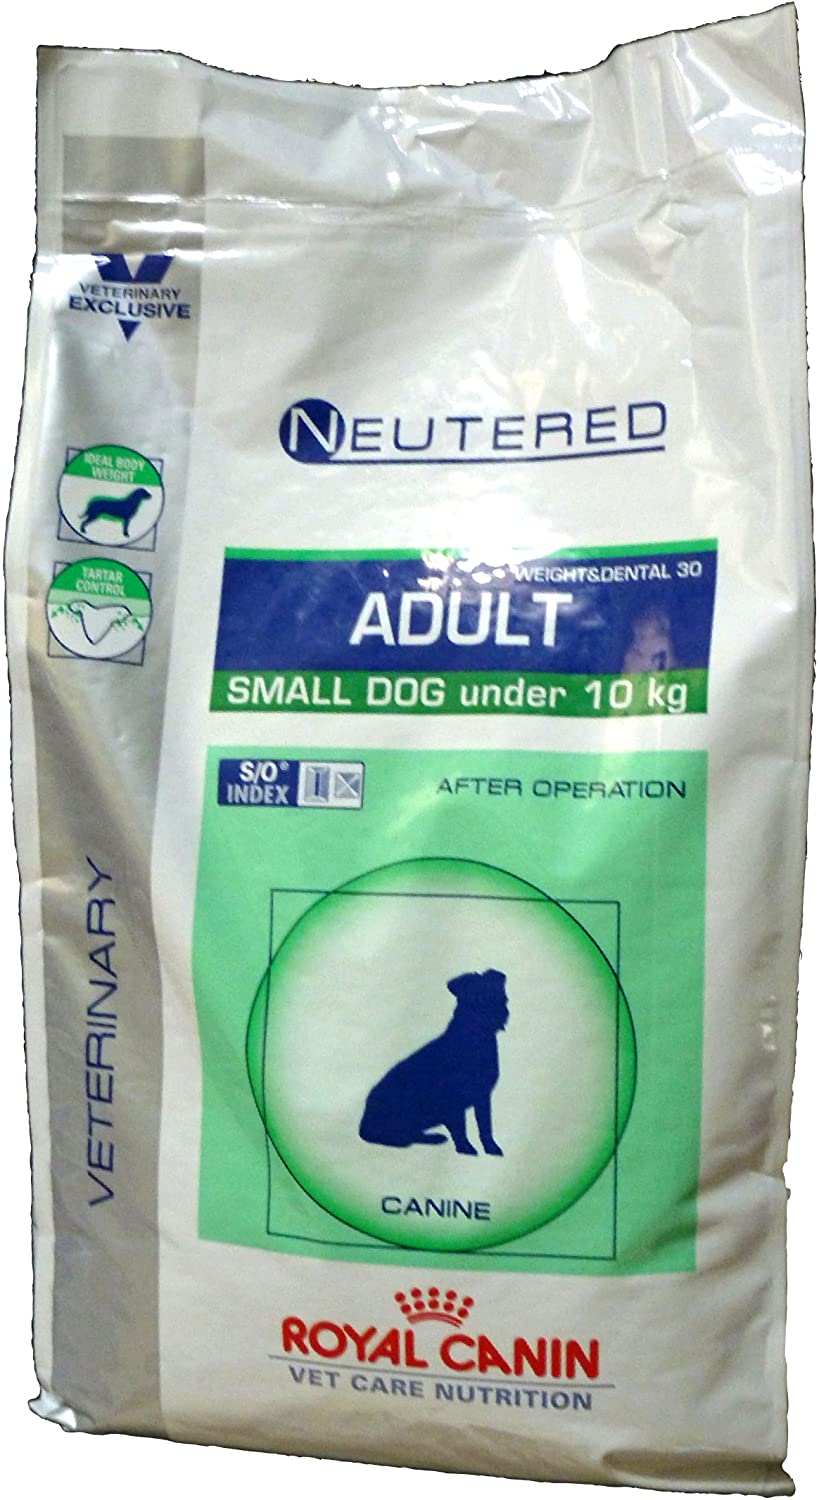  Royal Canin C-11260 Neutered Adult Small Dog - 3.5 Kg 